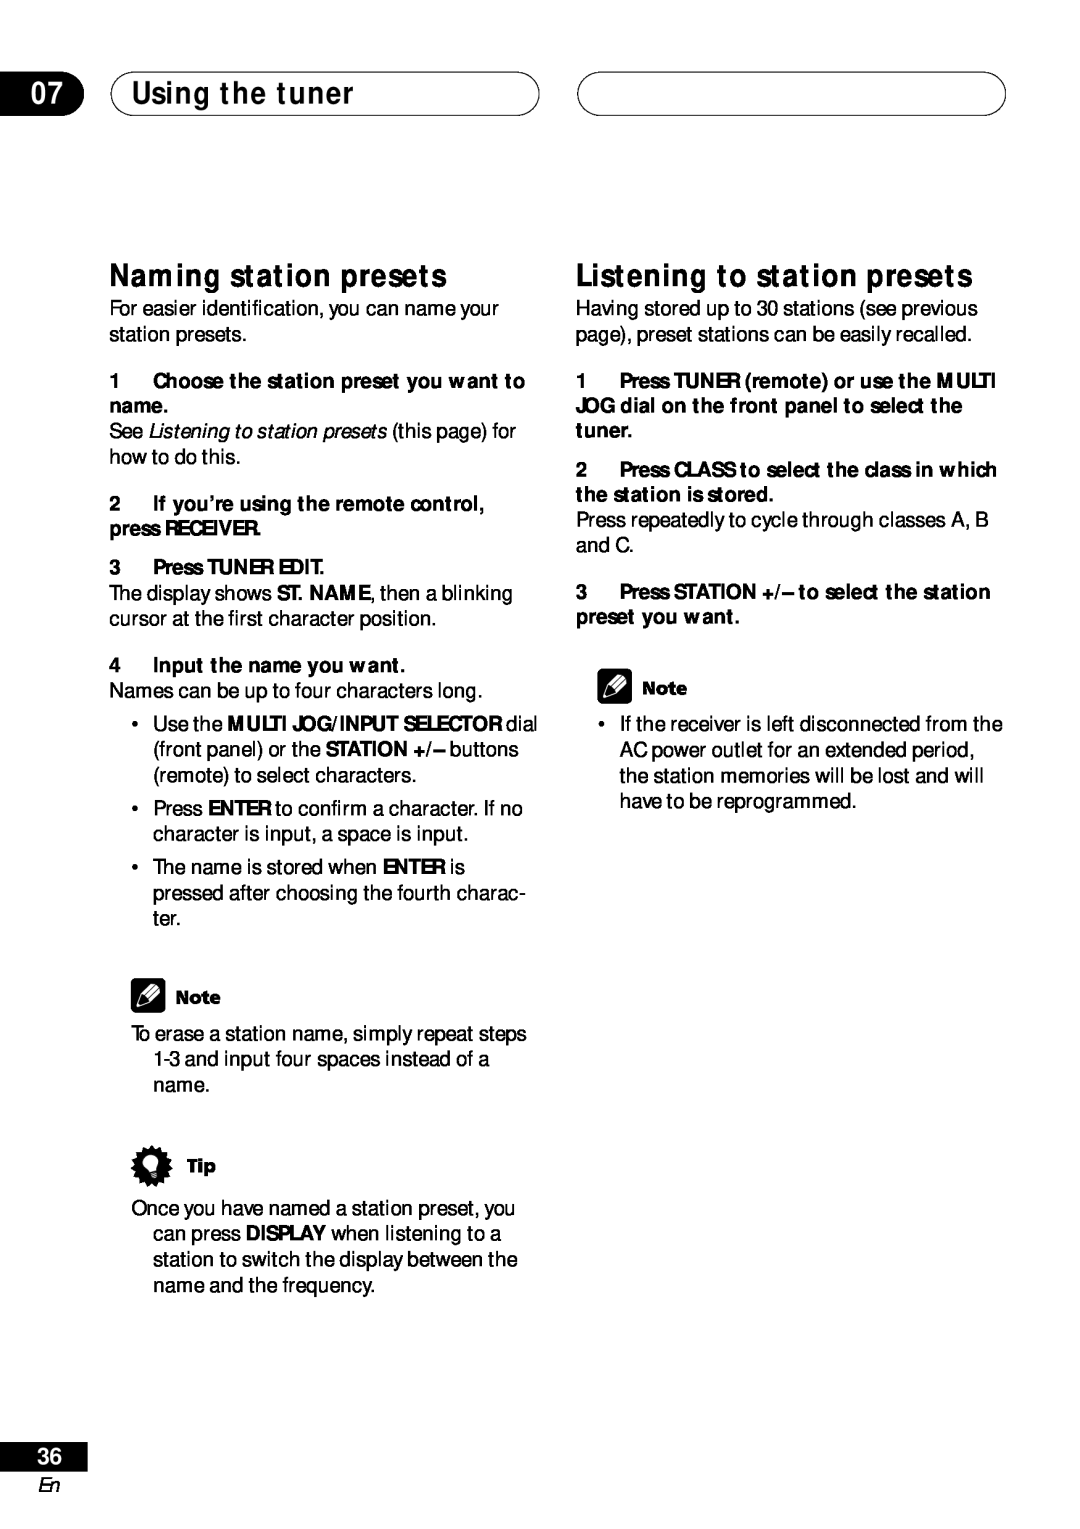 Pioneer VSX-D411 operating instructions 07Using the tuner Naming station presets, Listening to station presets 